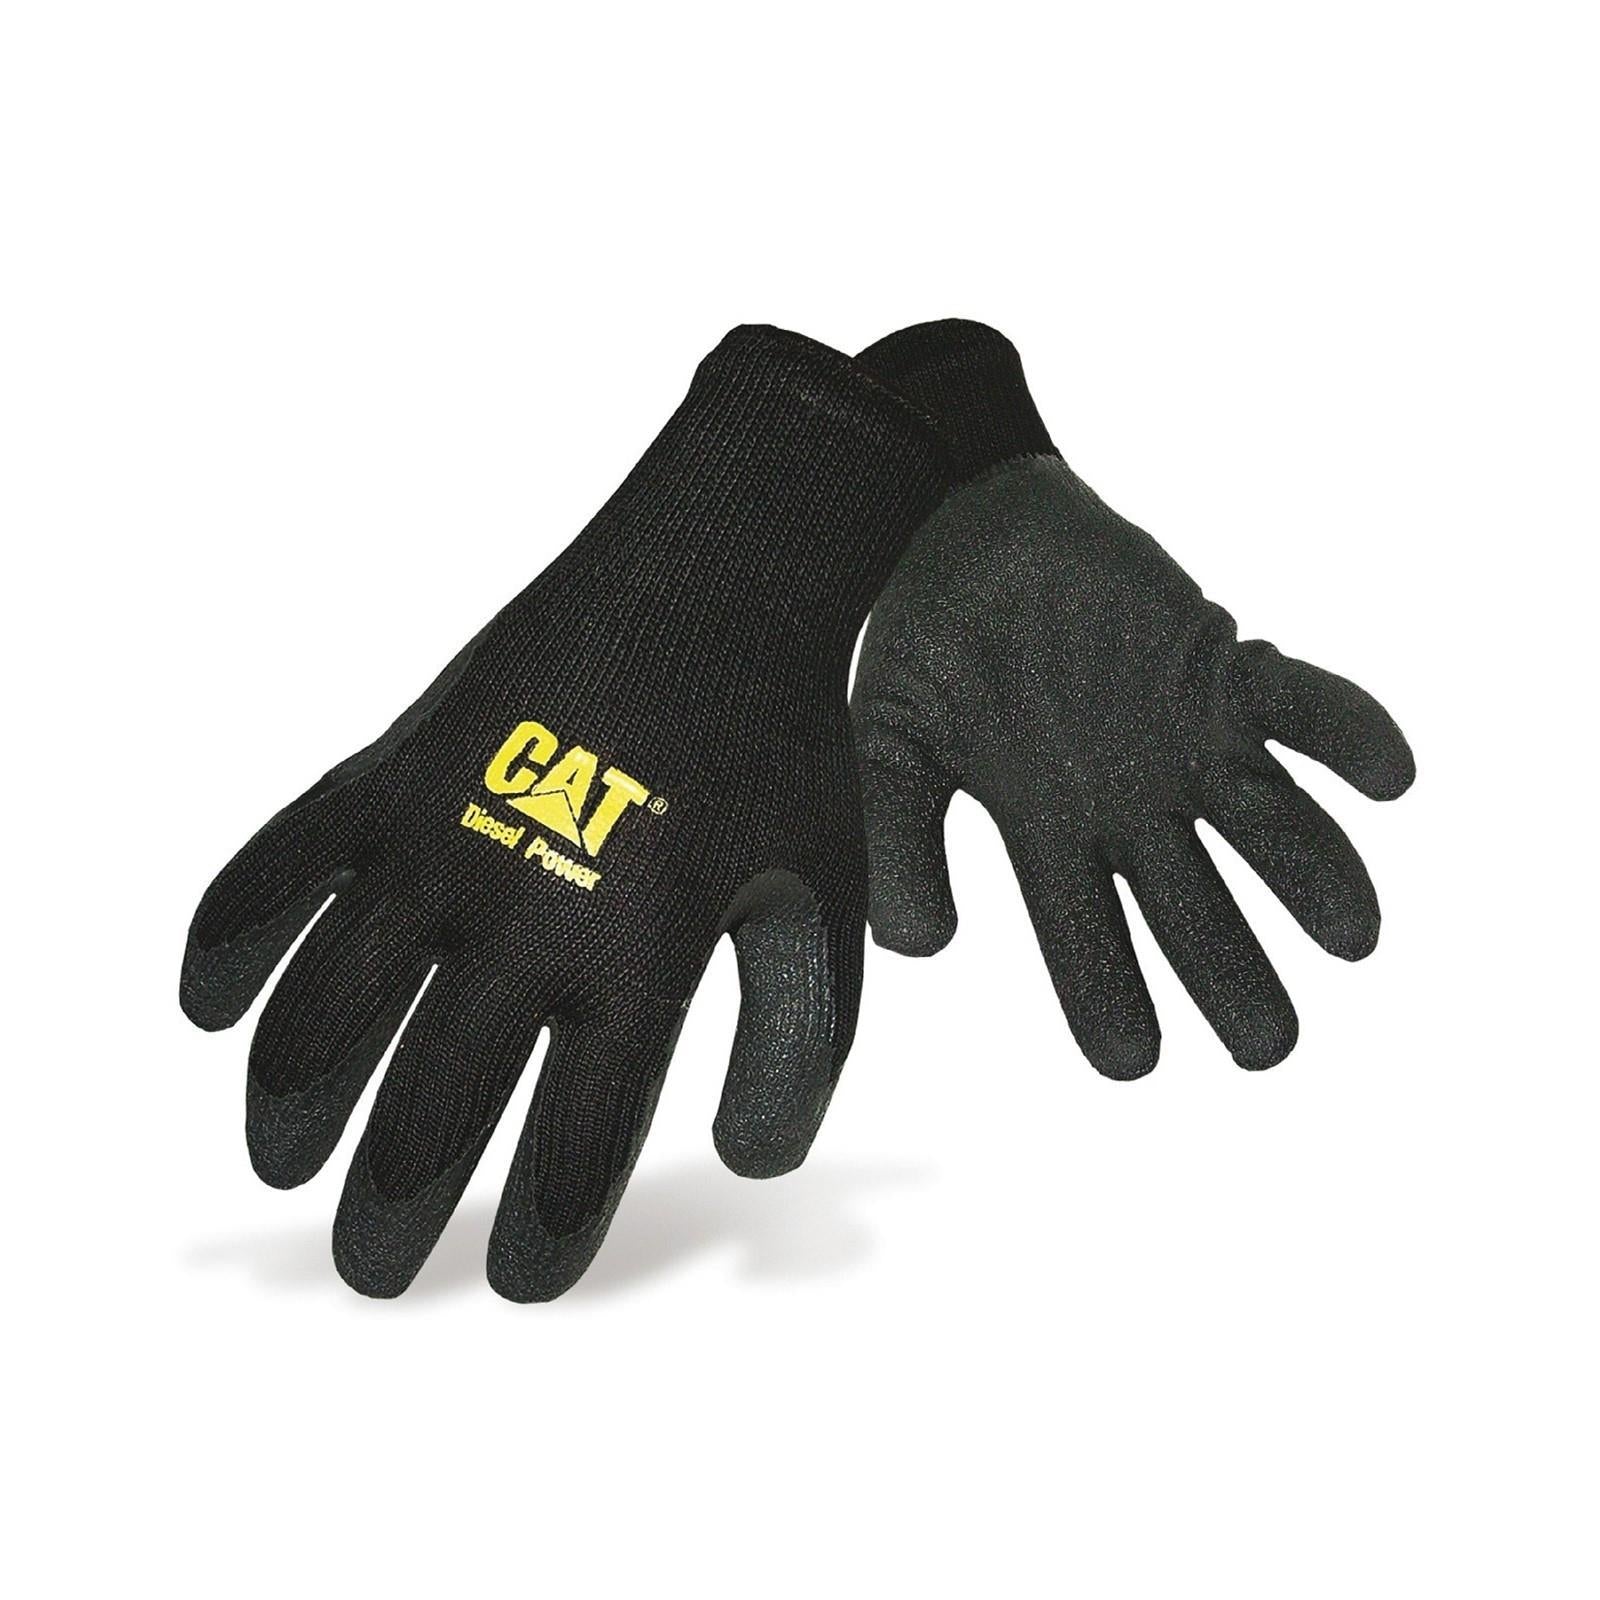 Caterpillar CAT Thermal Gripster cold weather dexterous grip work glove #17410